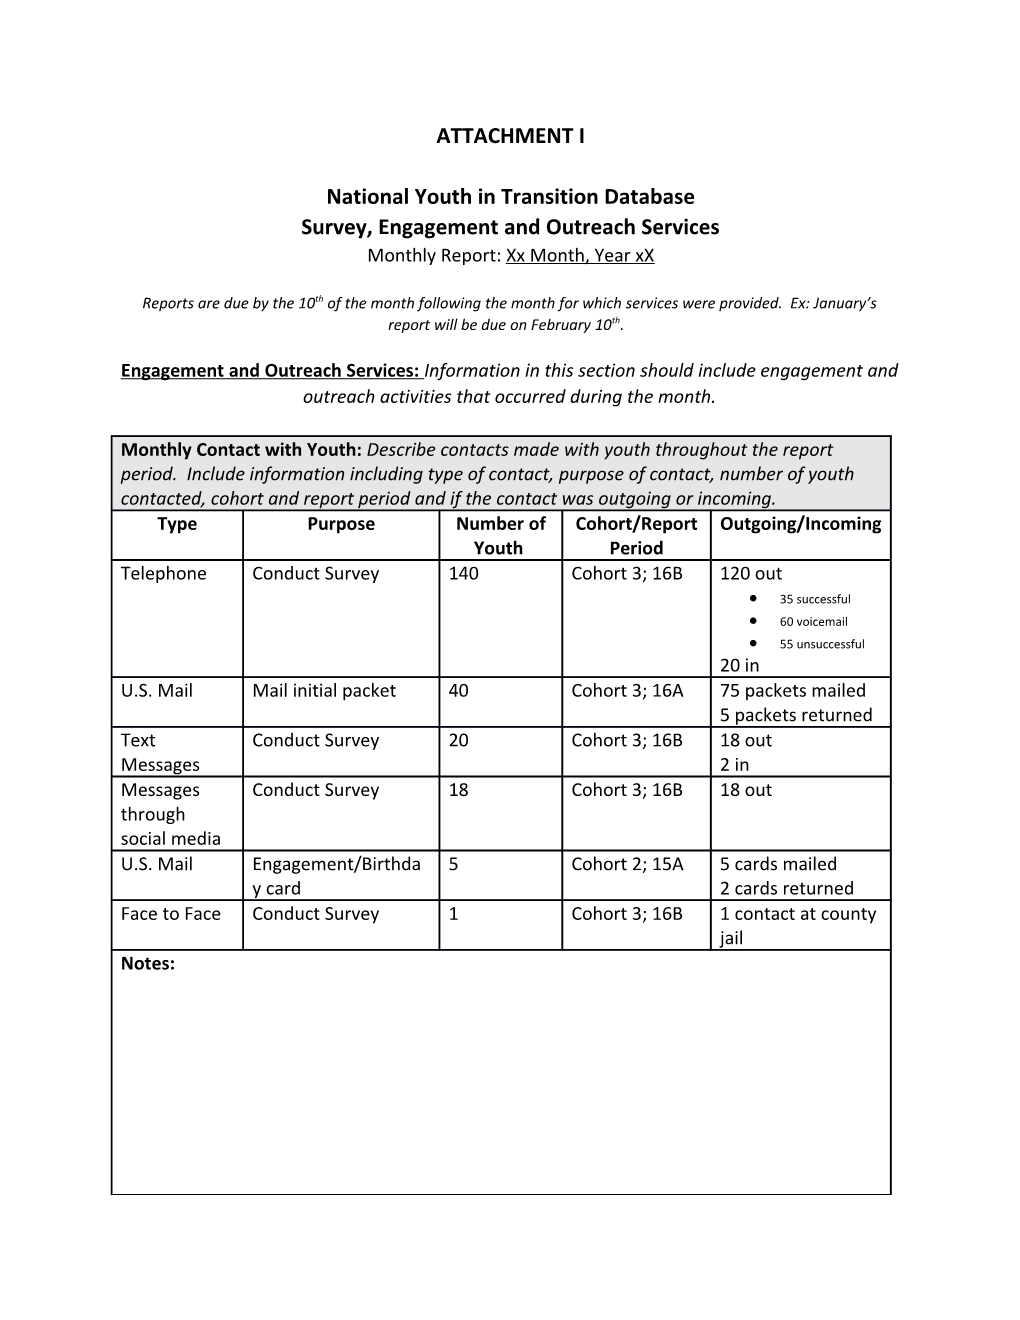 National Youth in Transition Database